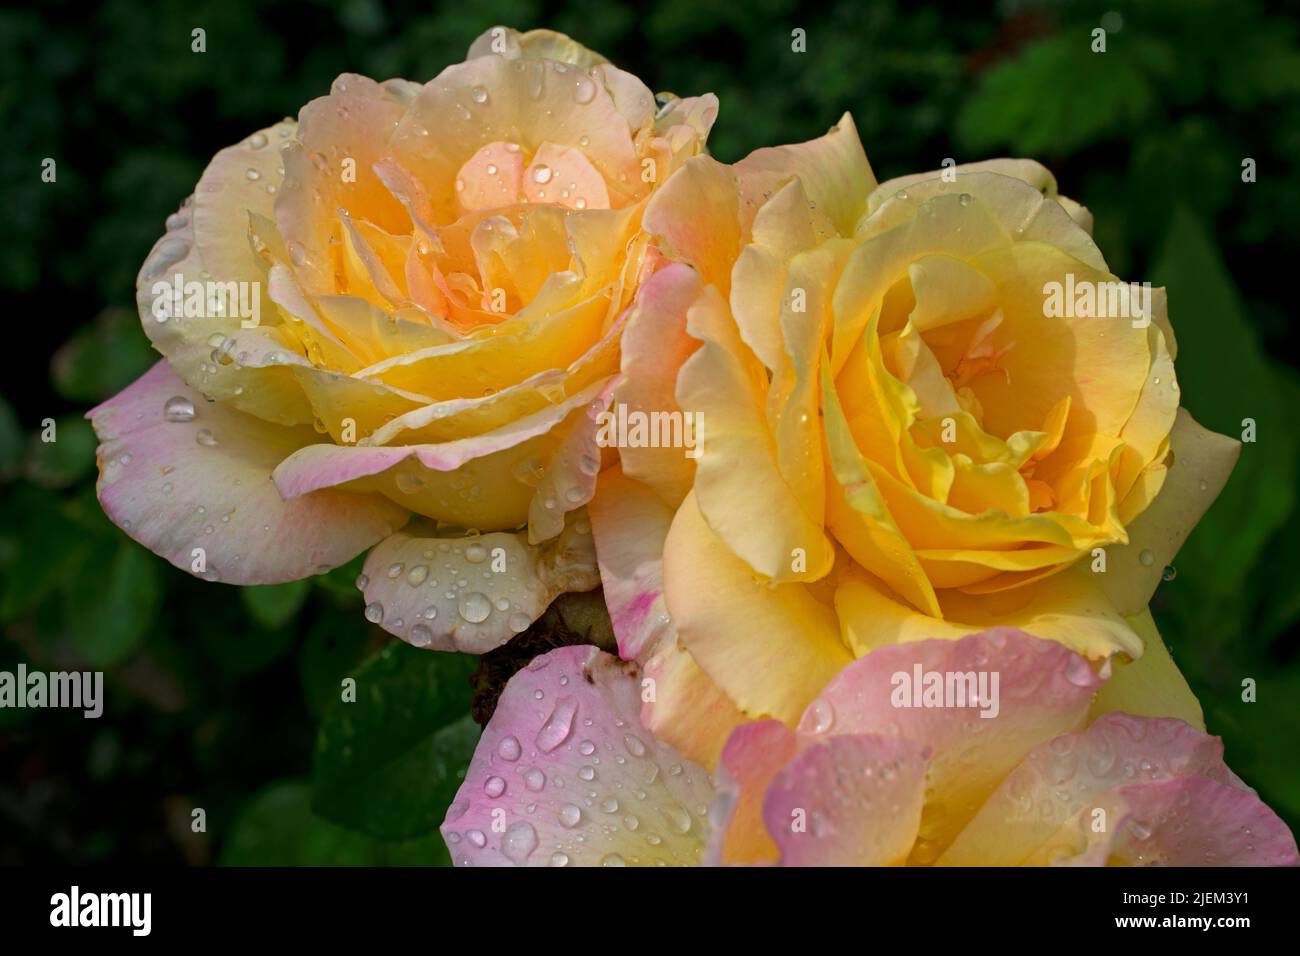 Several, large, pinkish yellow roses on a blurred green background of wet leaves and shrubs -22 Stock Photo